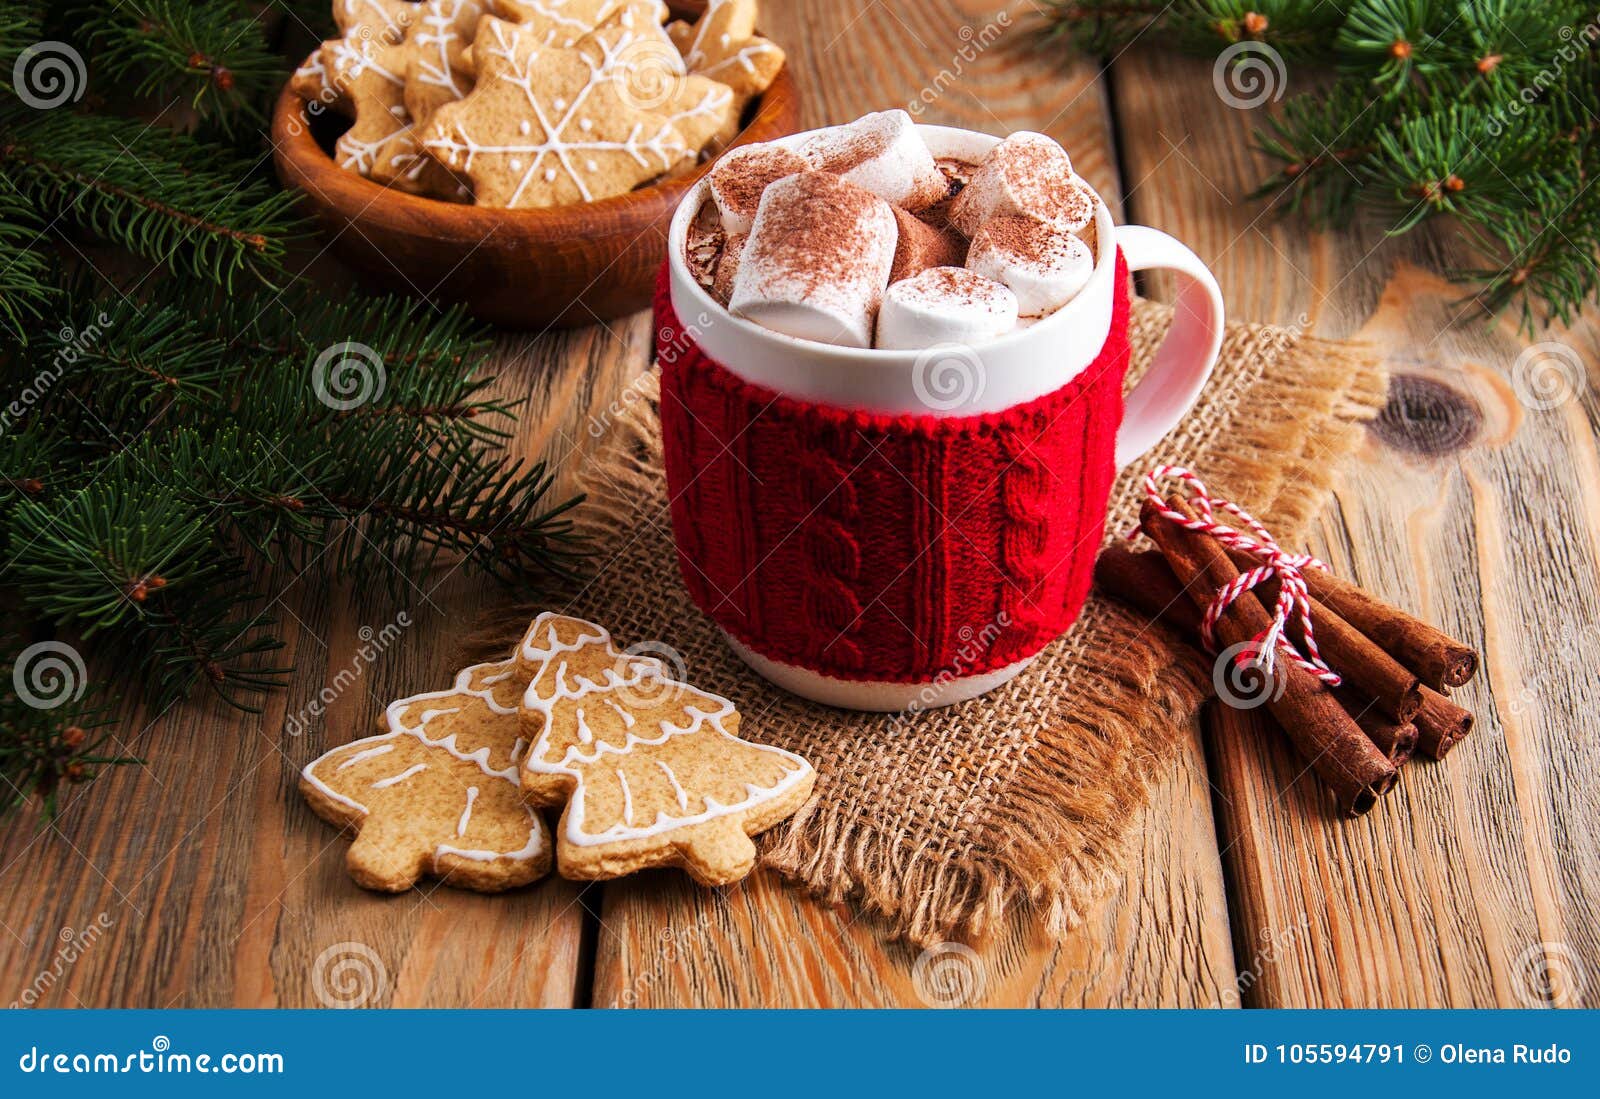 Cup of Christmas cocoa stock image. Image of gourmet - 105594791